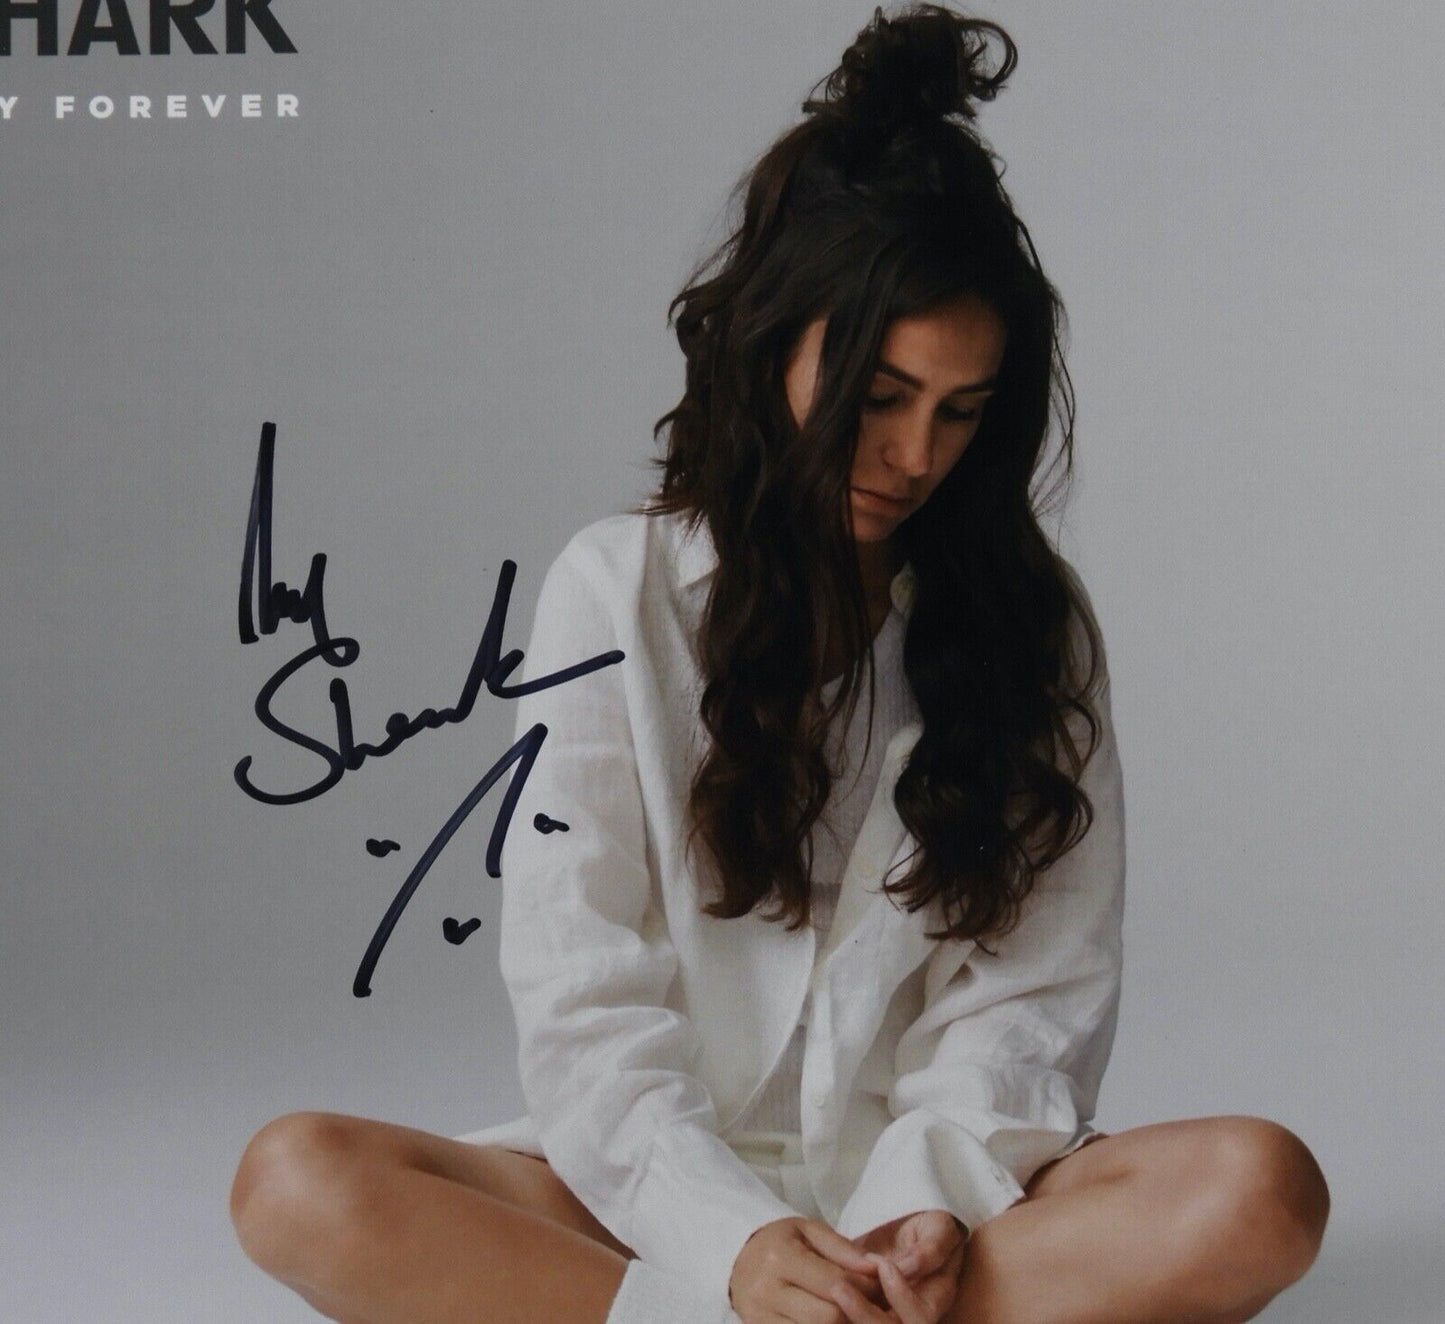 Amy Shark JSA Signed Autograph Album Record Lithograph Cry Forever